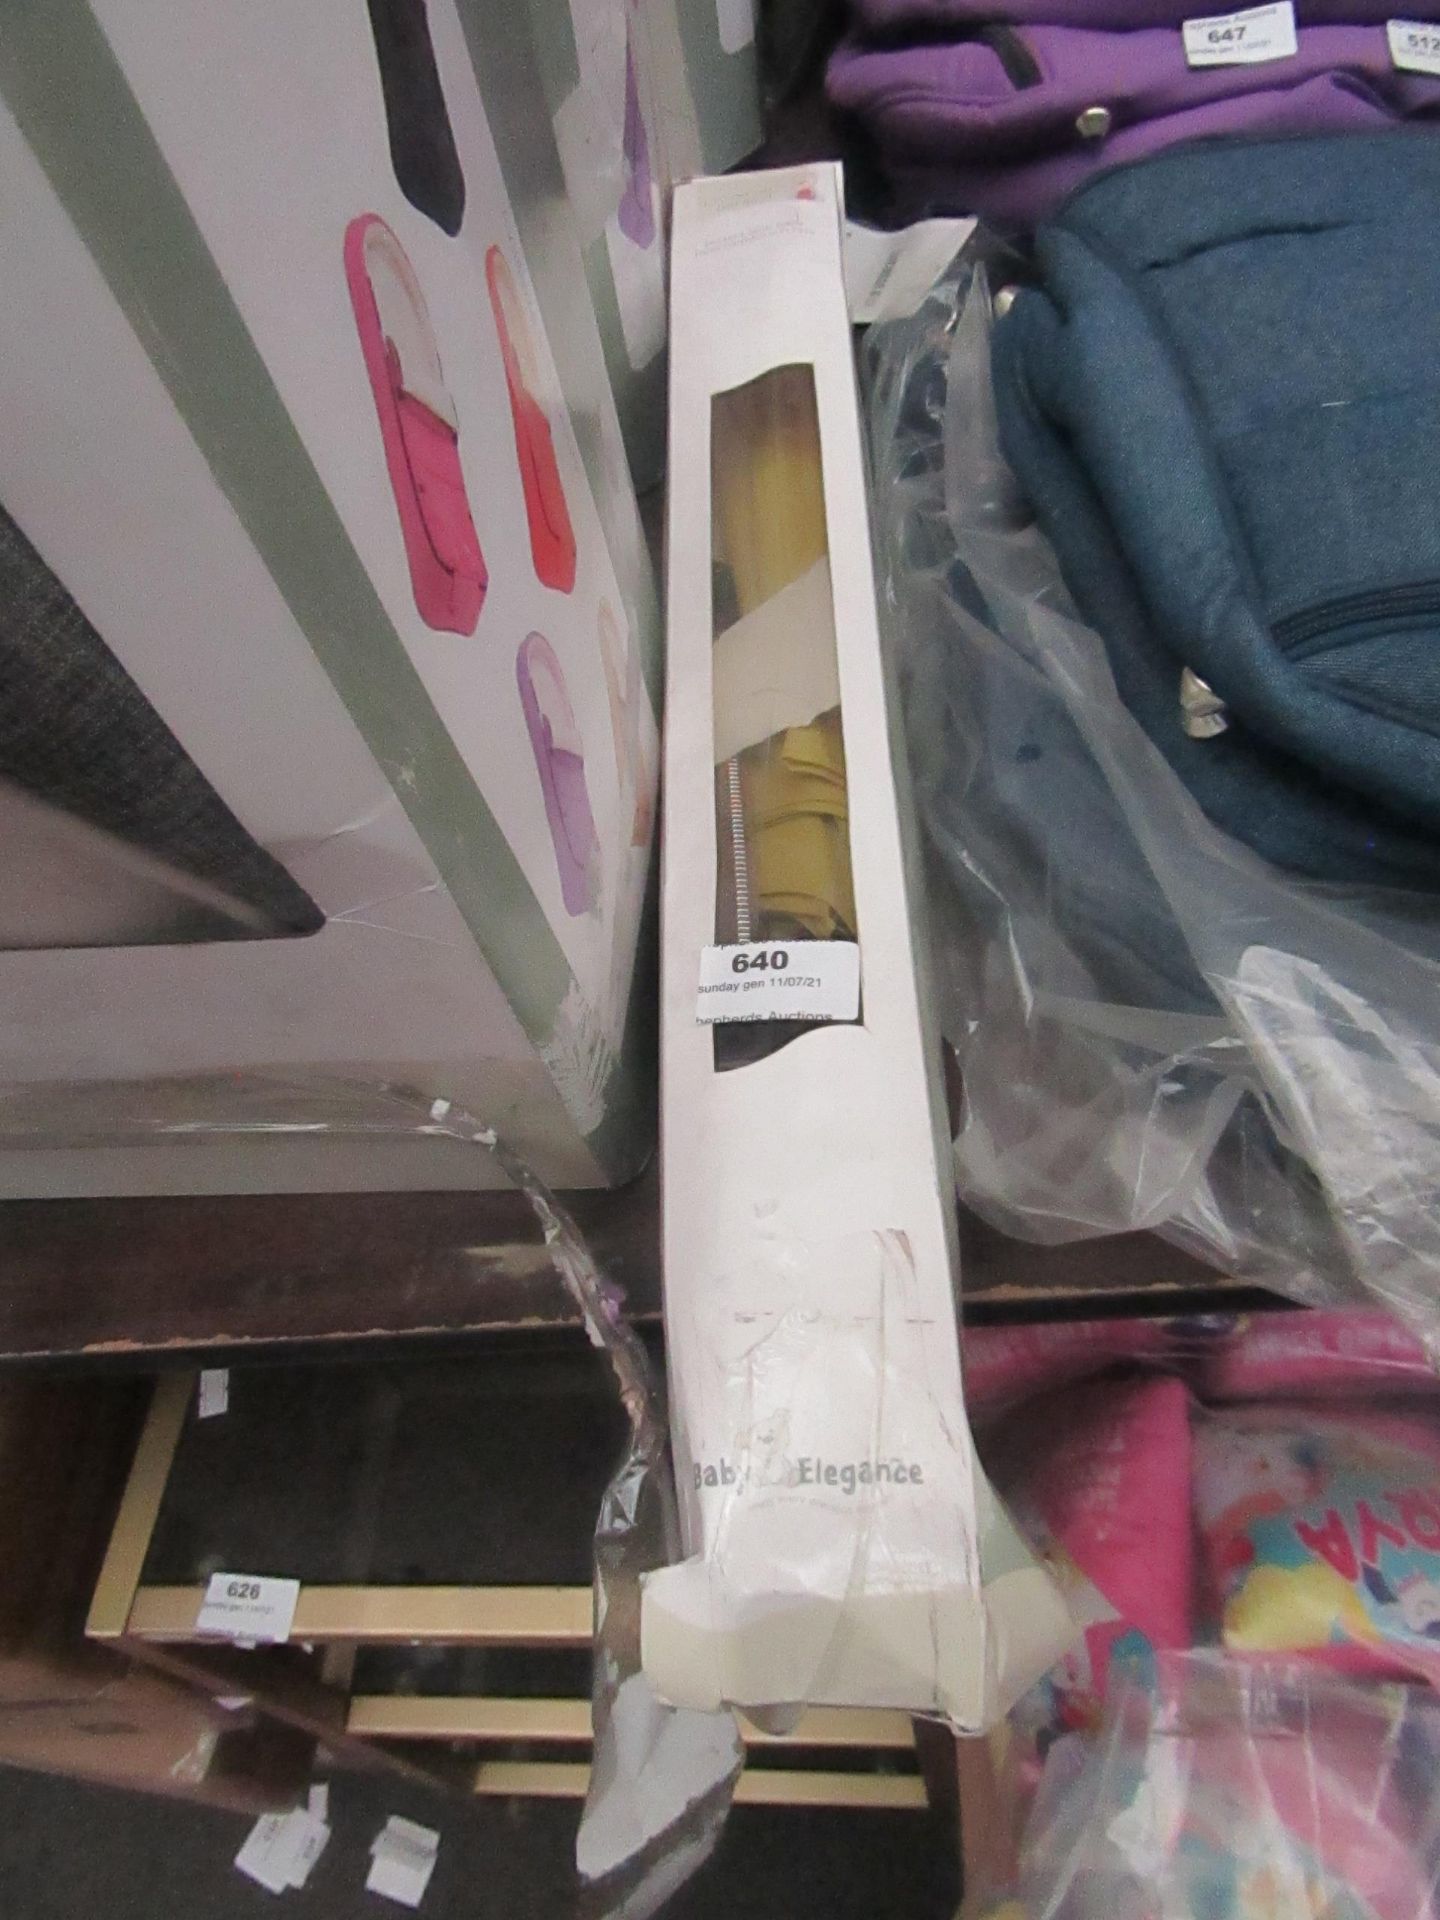 Baby Elegance universal parasol, unchecked and boxed.